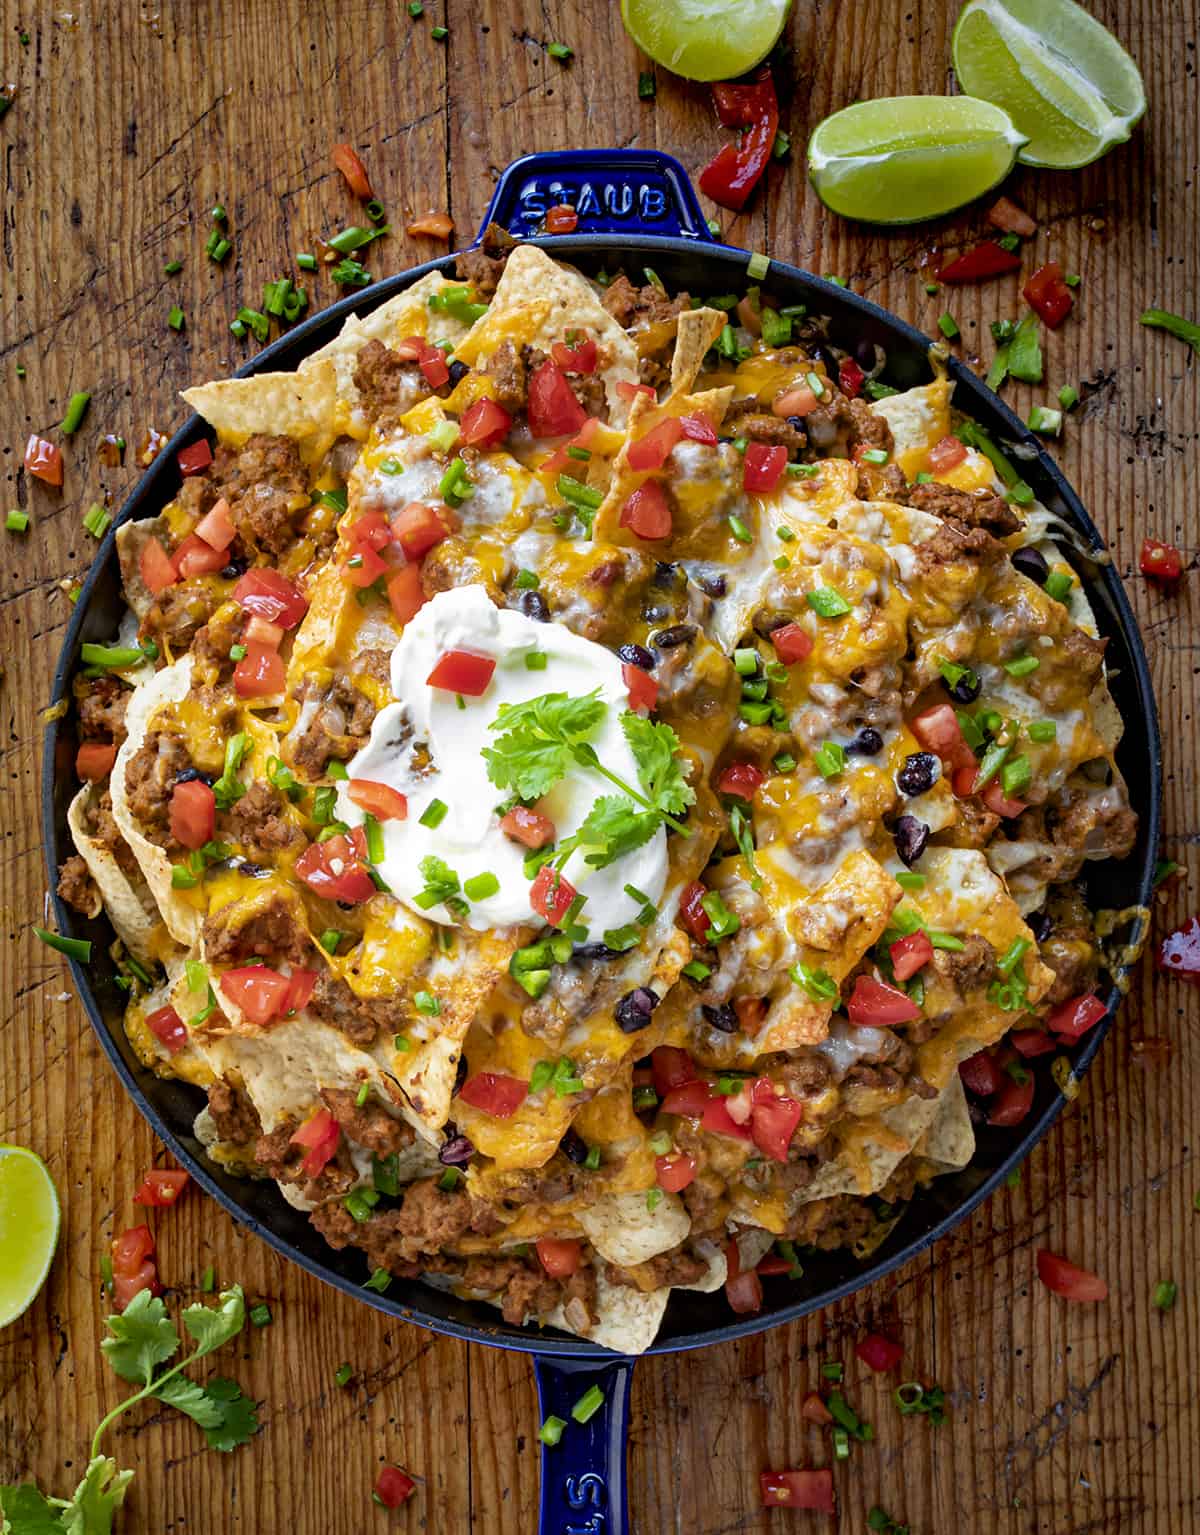 A Skillet Filled with Layers of Beef Nachos and Topped with Melted Cheese, Tomato, Sour Cream, and Lime.